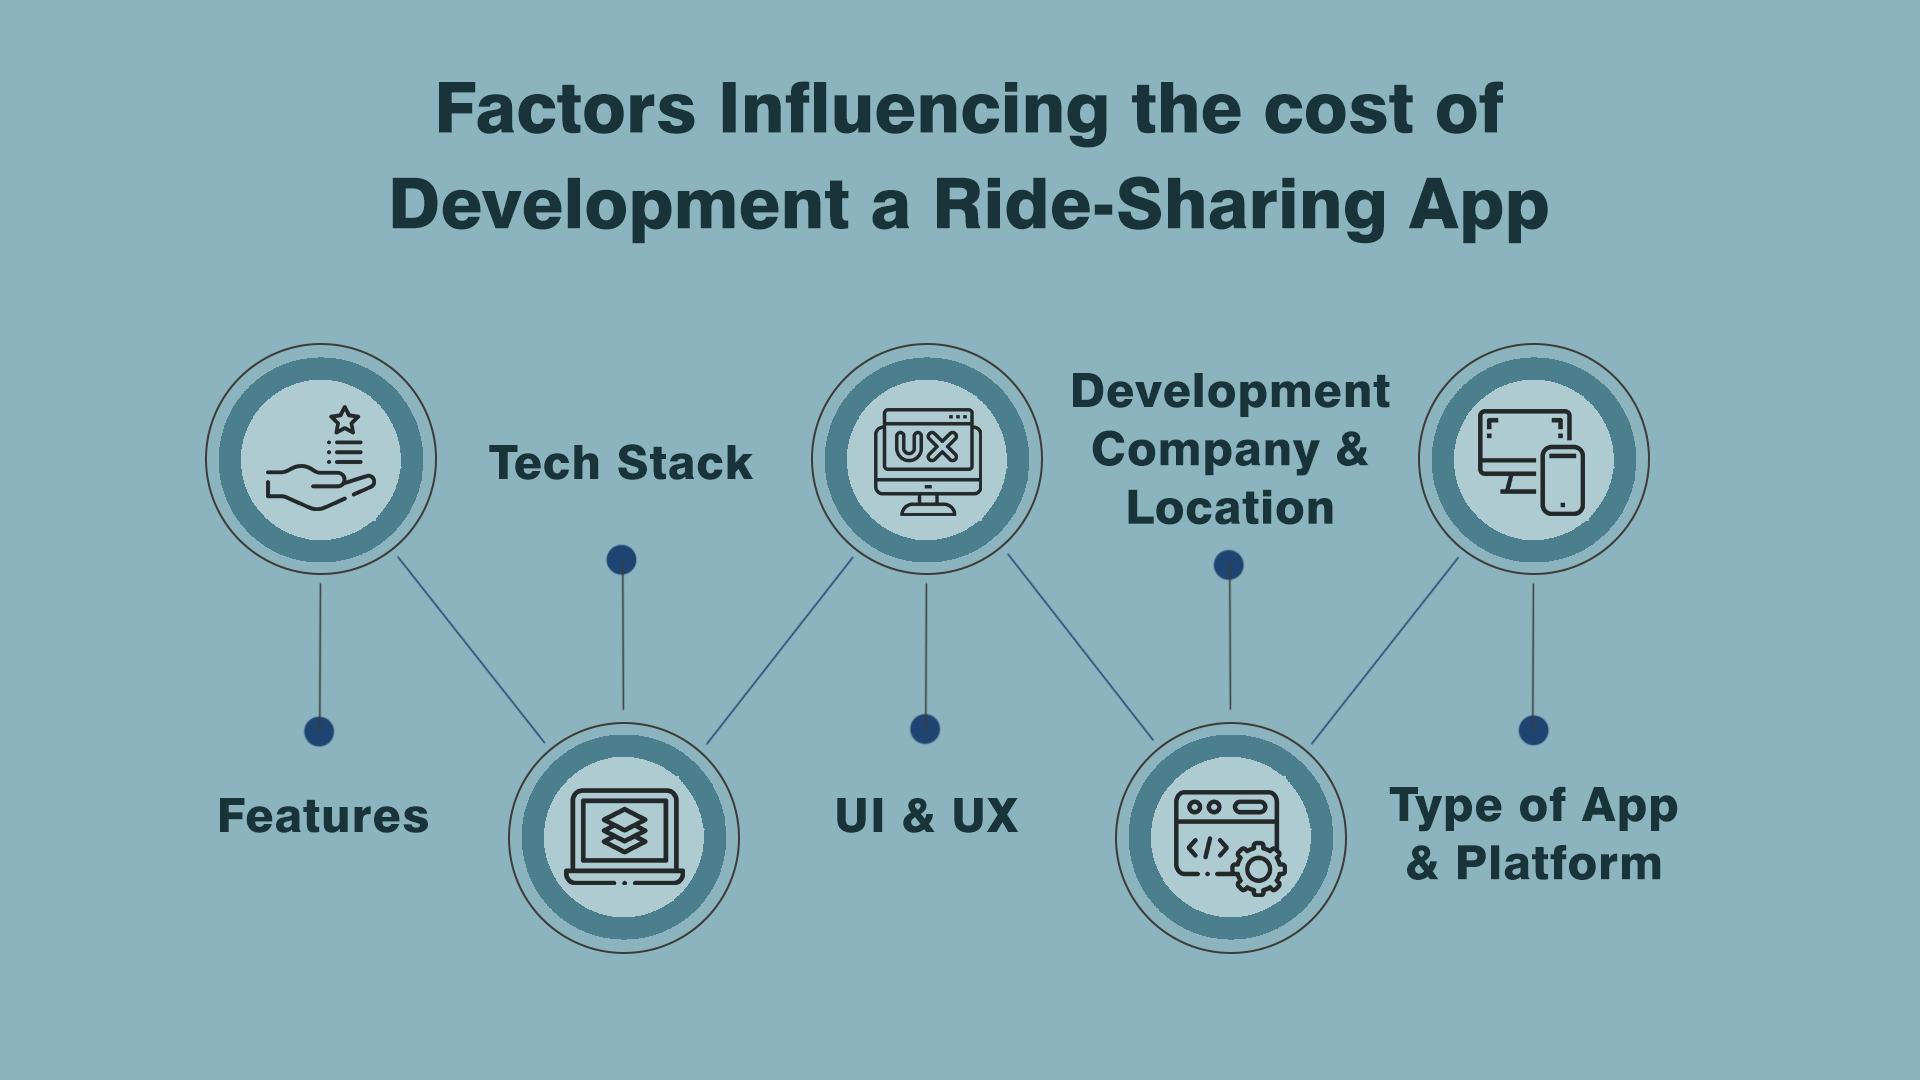 Factors Influencing the cost of Development a Ride-Sharing App